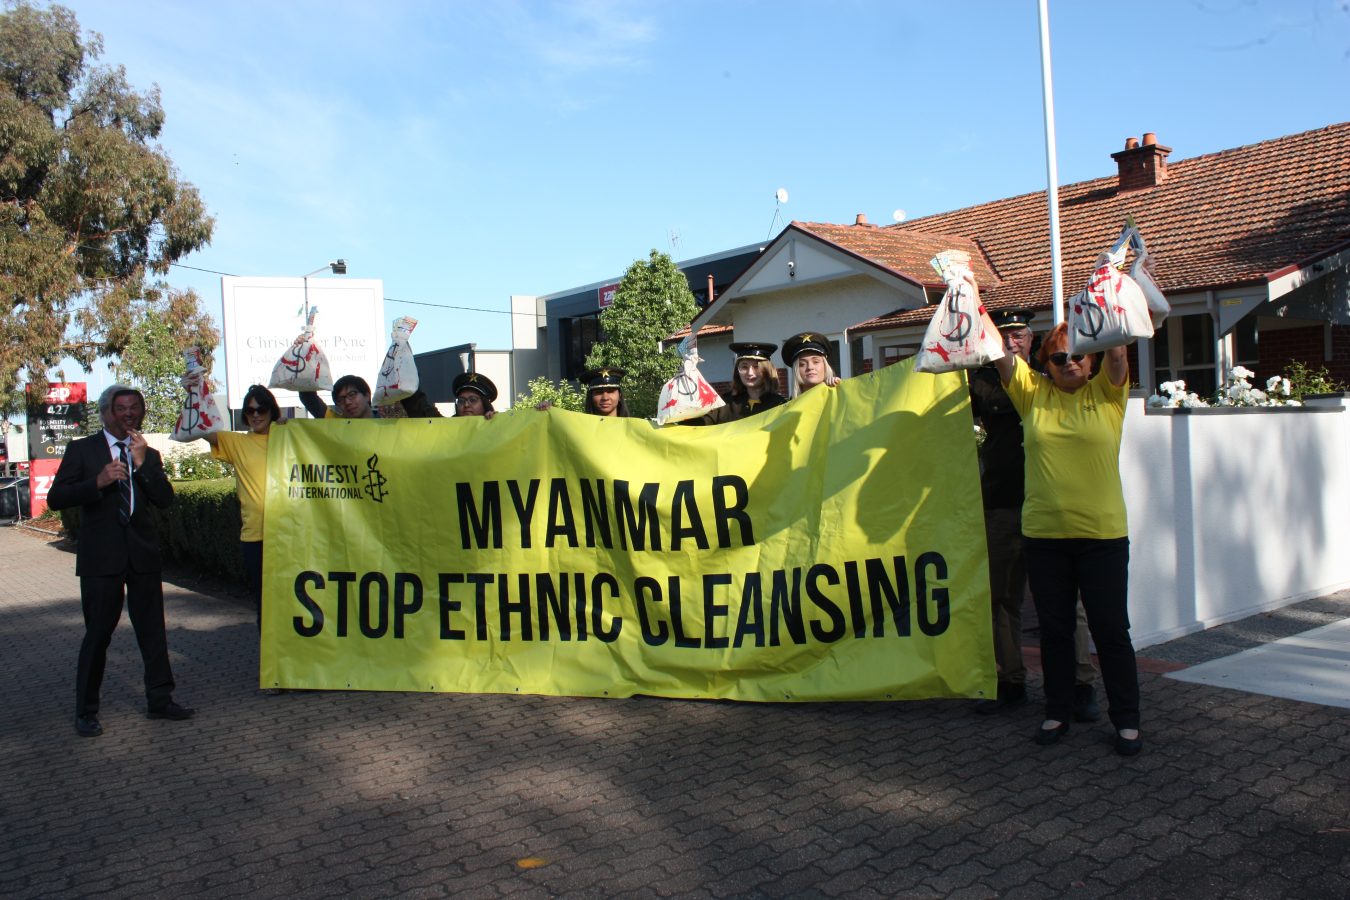 a group of people standing on a footpath with a large yellow sign saying 'Myanmar stop ethnic cleansing'